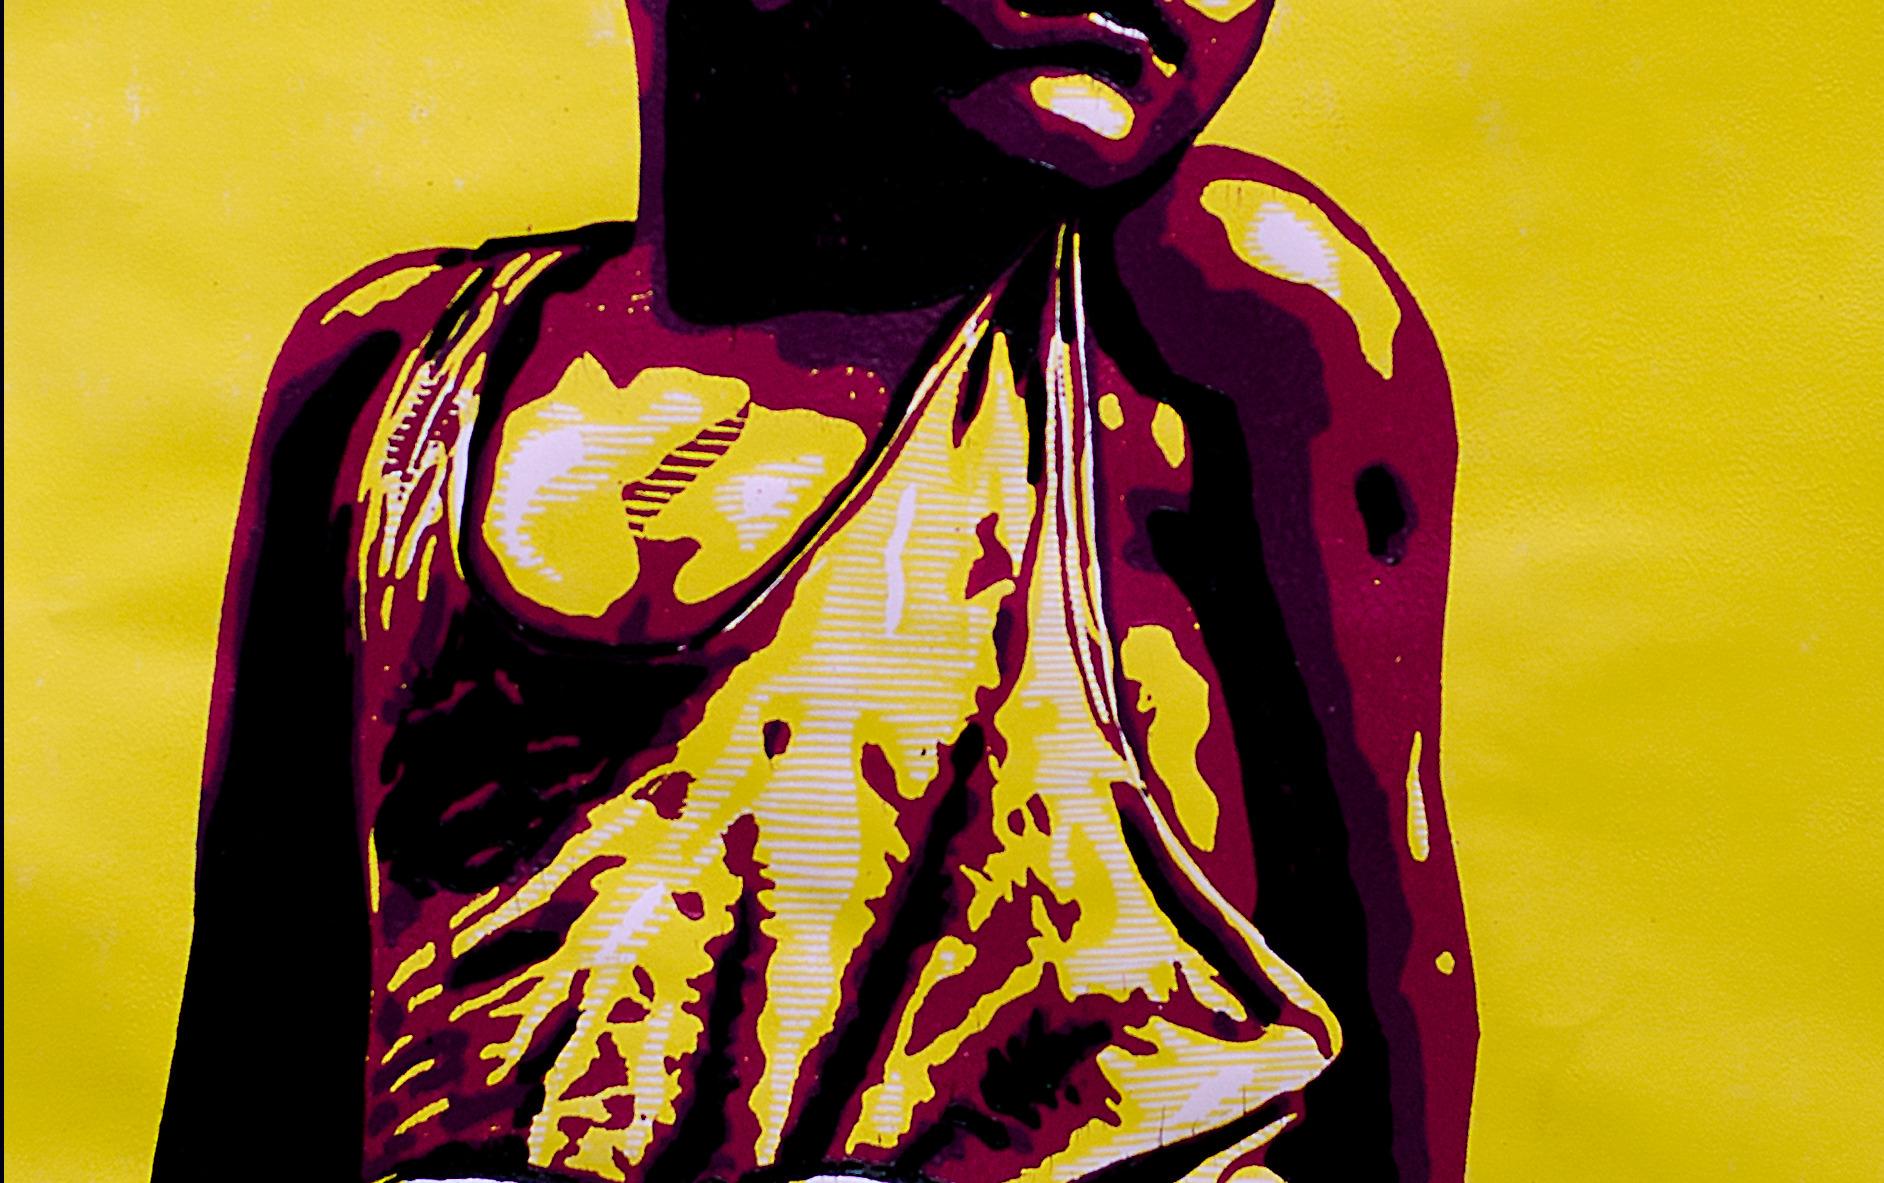 Let the truth be your watchword, no matter what the situation is, cross your heart to speak what the is.

This is a large, extraordinarily beautiful linocut print on canvas.
Unmounted artwork
Ships in a well-protected tube from Nigeria
Signed on the